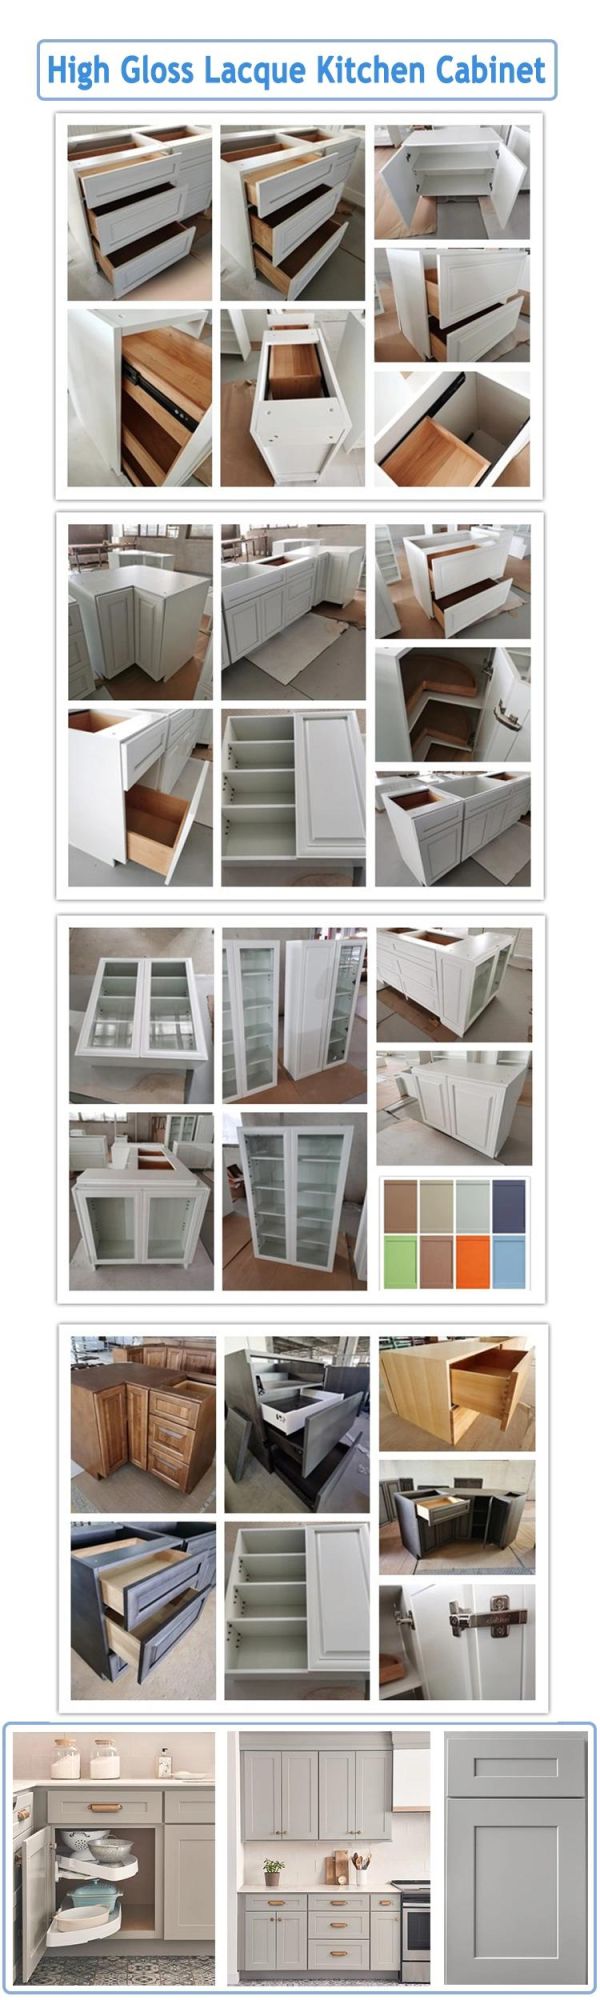 Decorative Wardrobes Closet Bedroom Furniture Wooden with Lamination Sheets